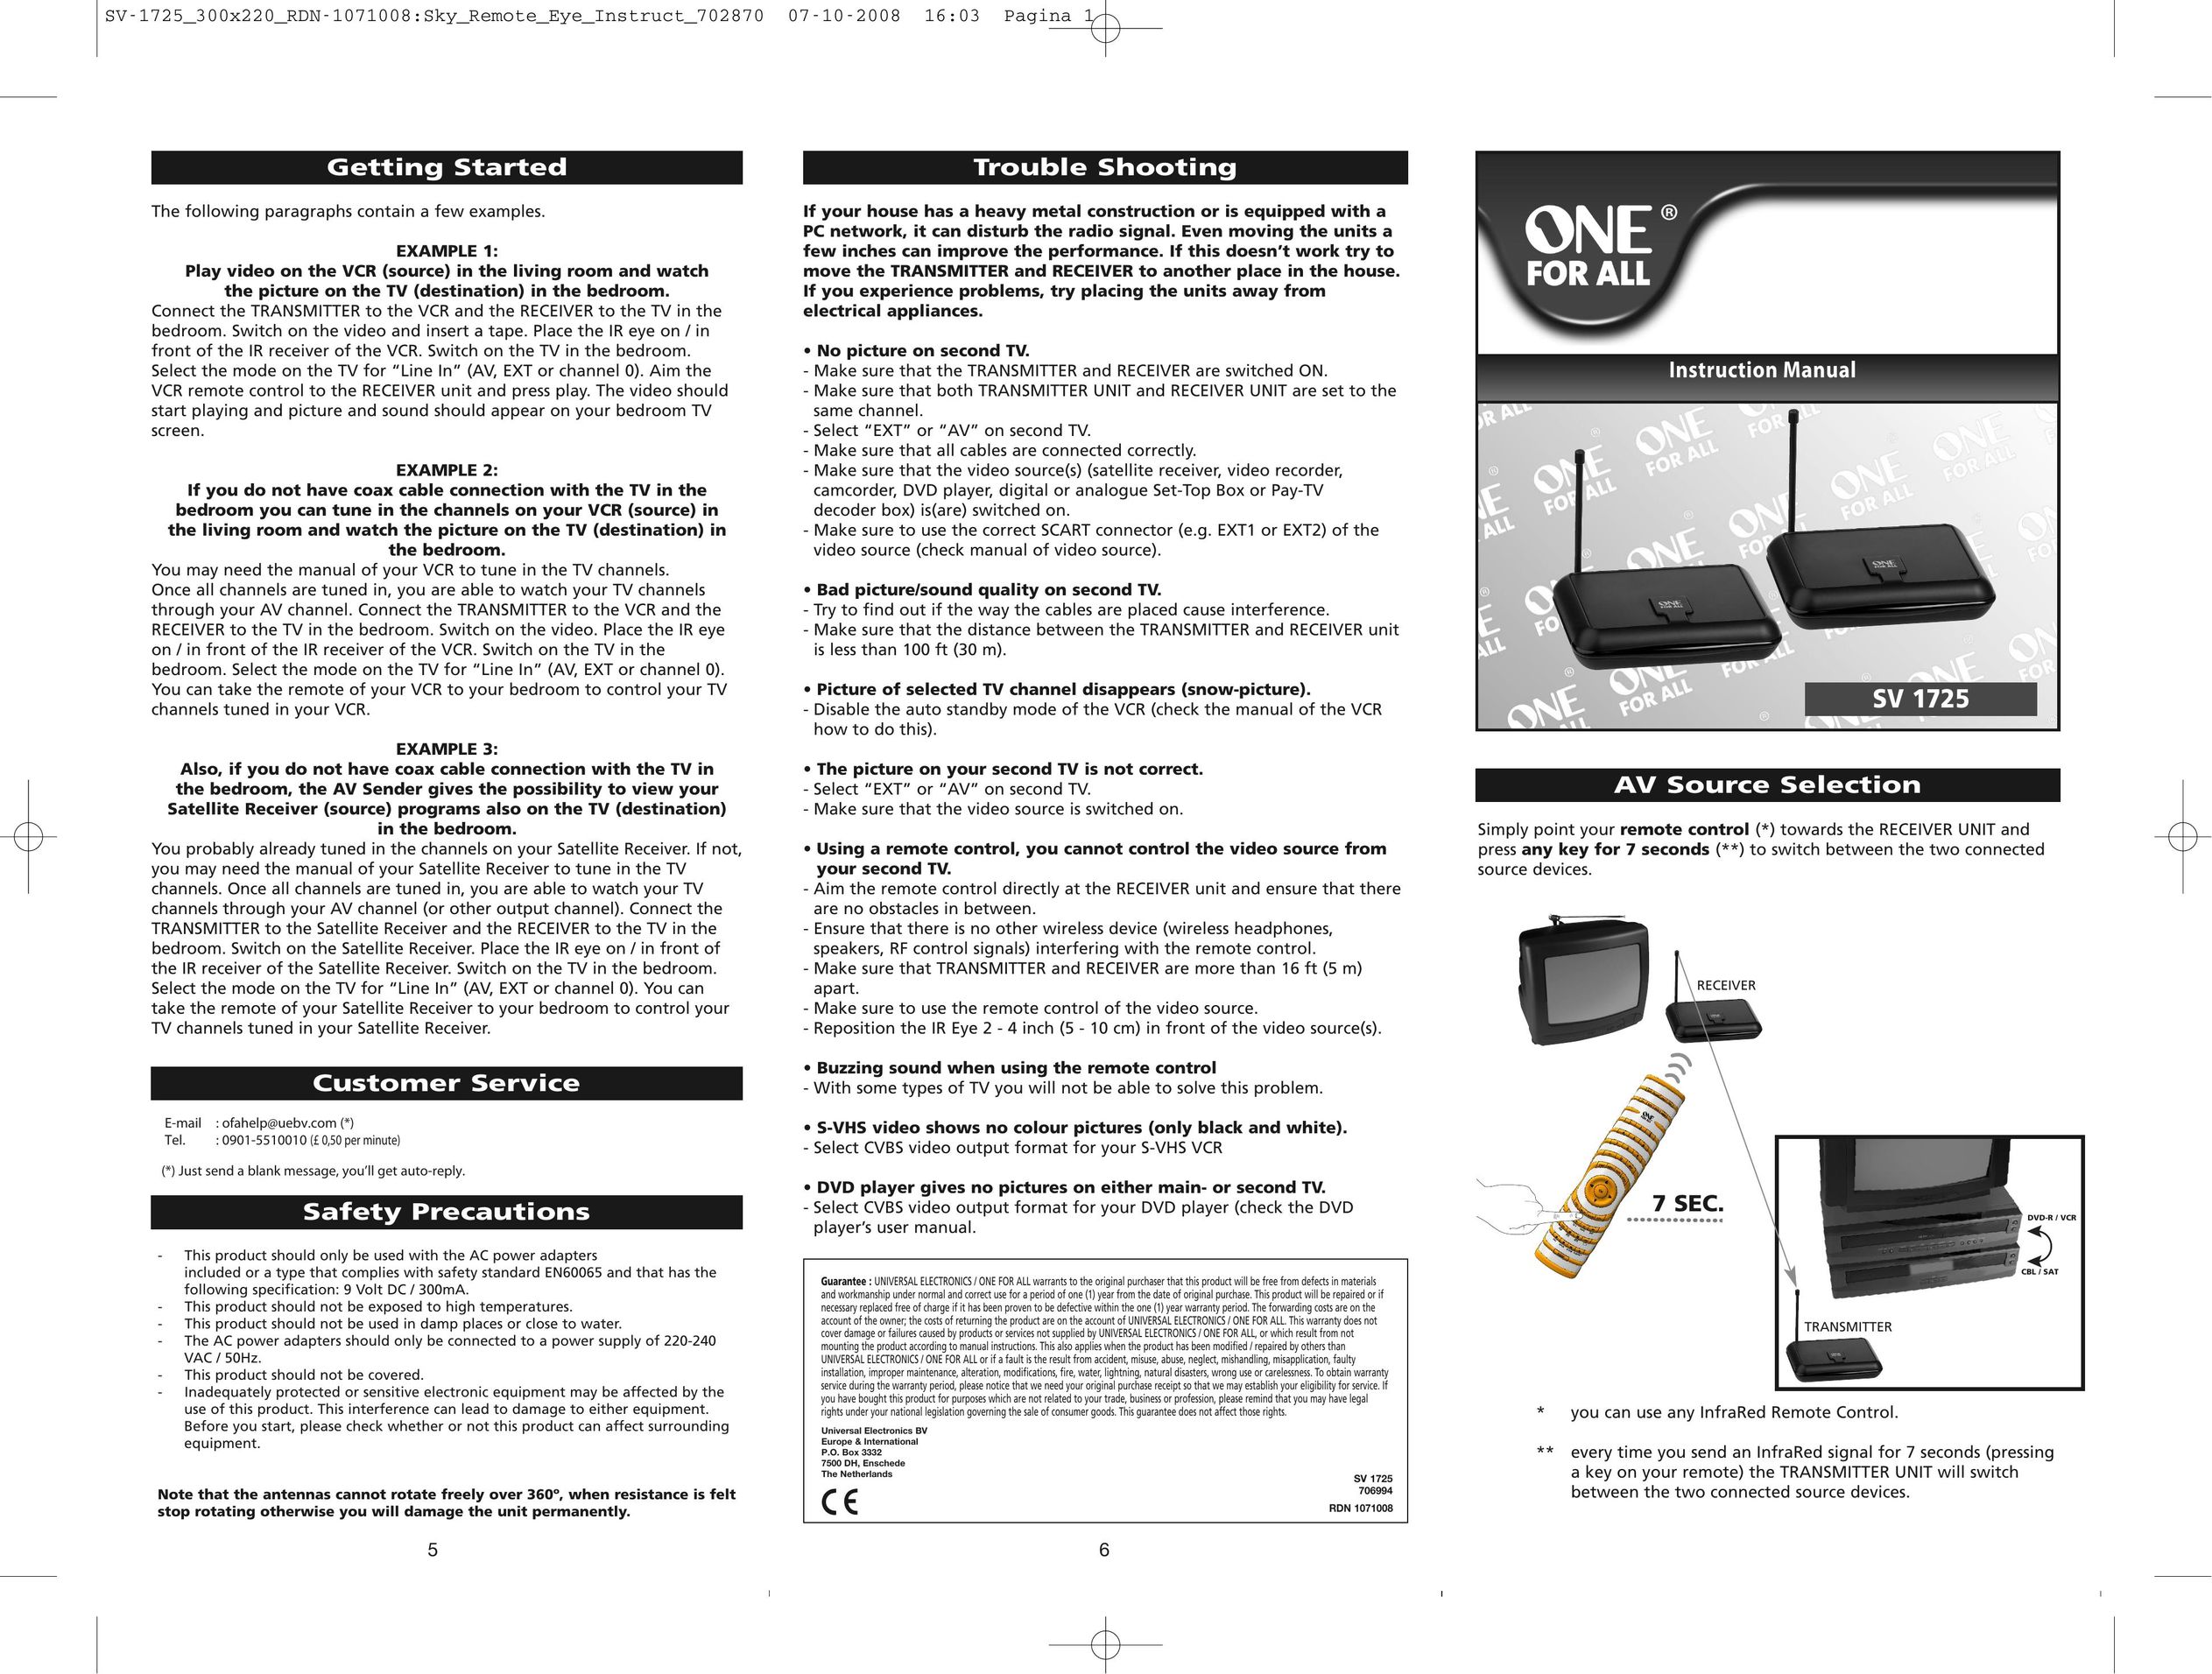 One for All SV-1725 TV Video Accessories User Manual